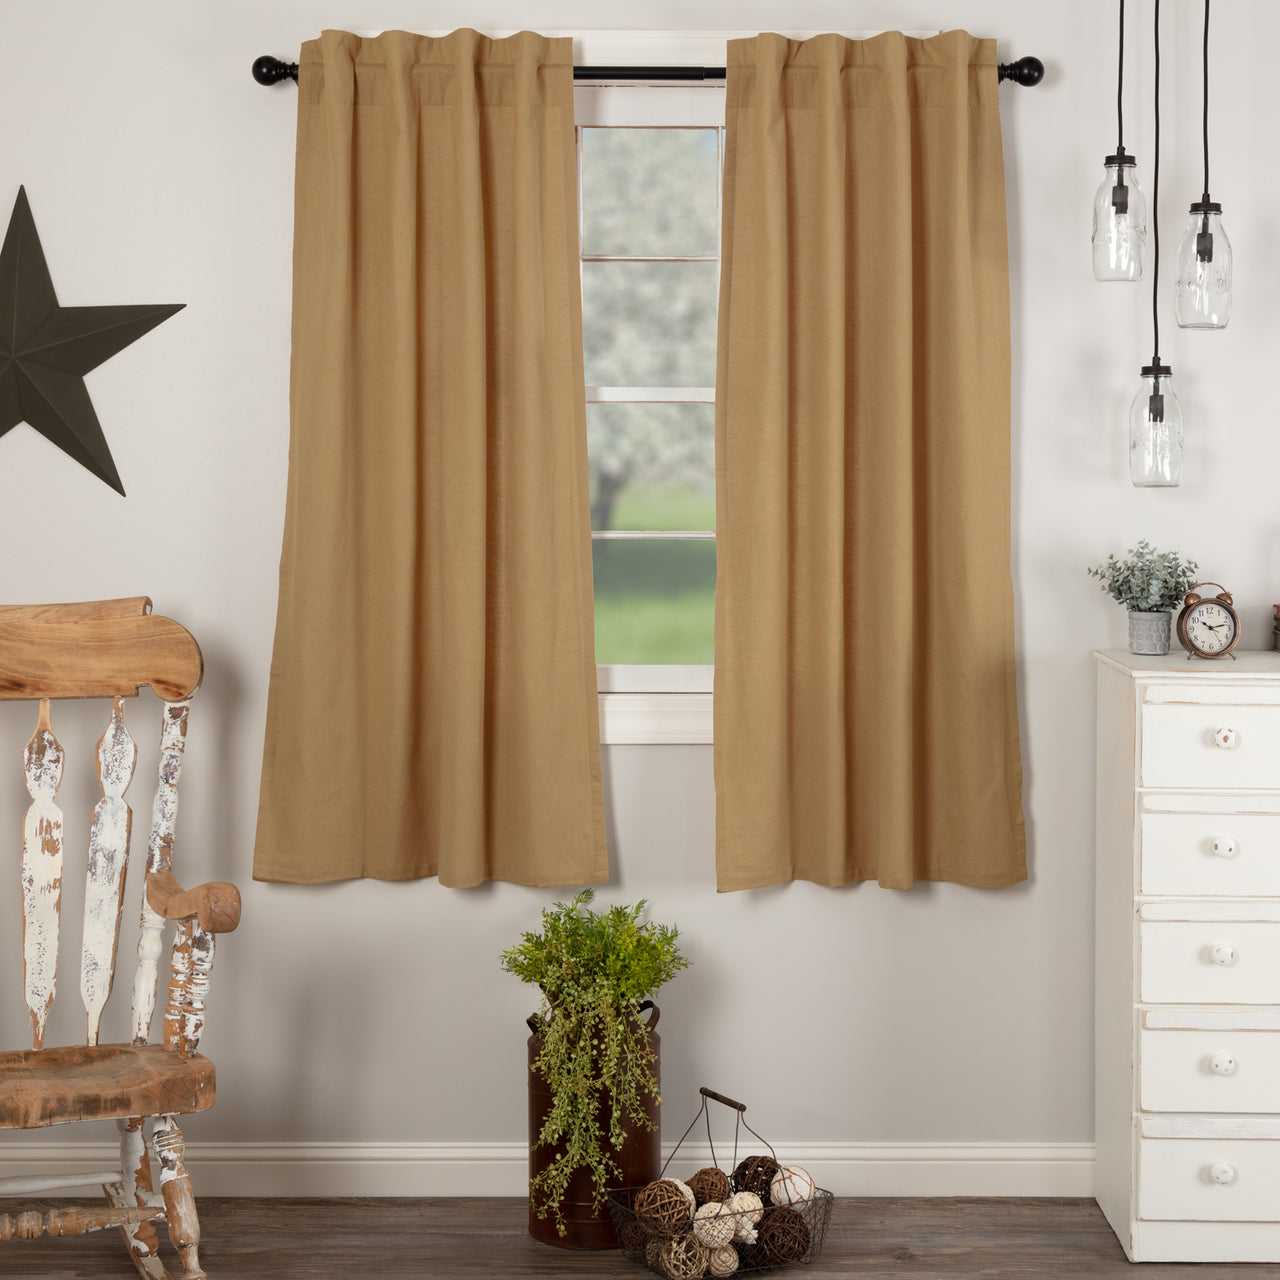 Simple Life Flax Khaki Short Panel Country Style Curtain Set of 2 63"x36"